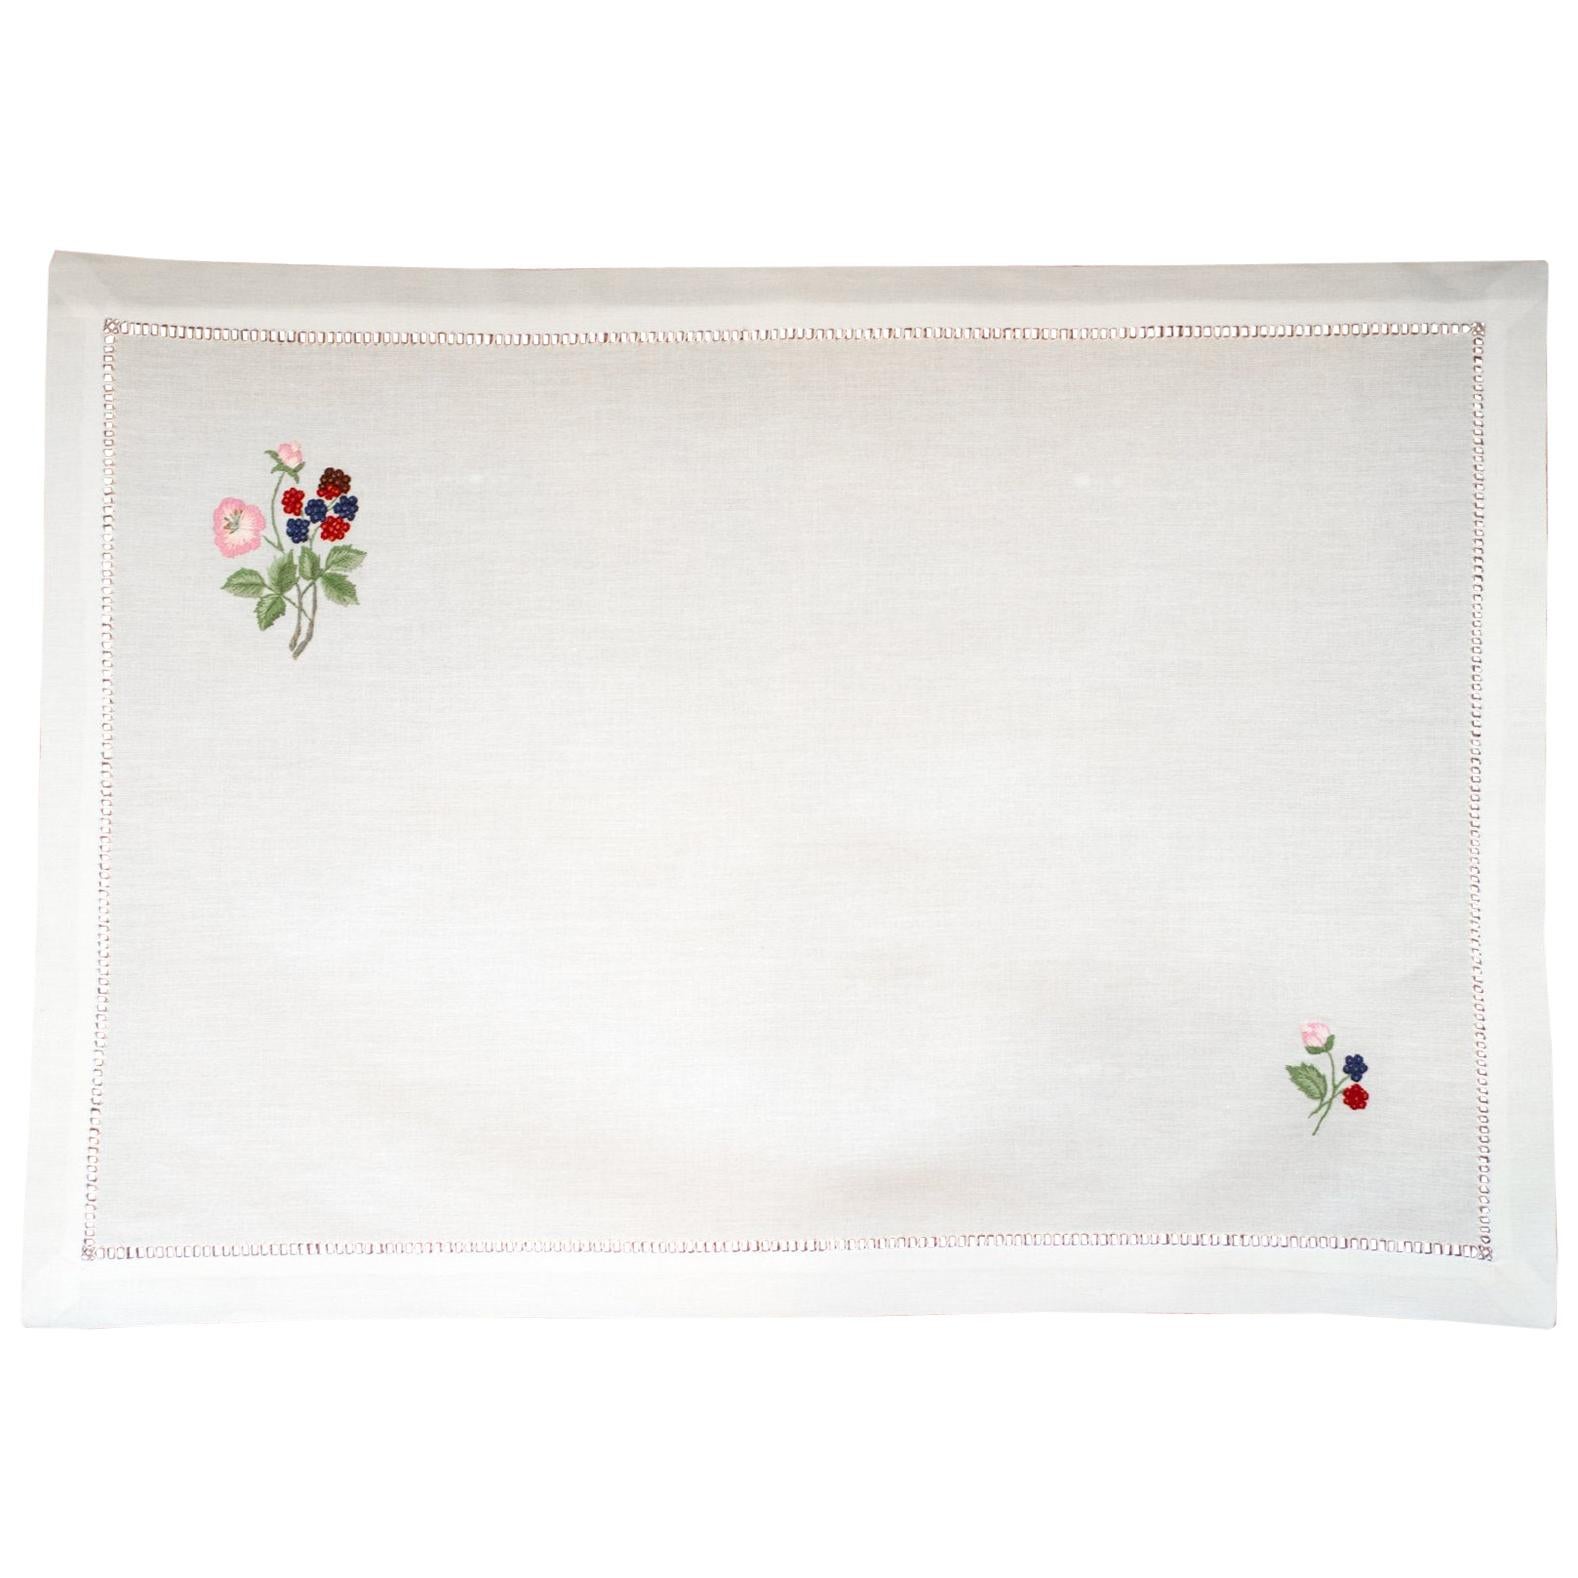 Set of 12 Hand Embroidered Table Linen Placemats with Multi-Color Flowers